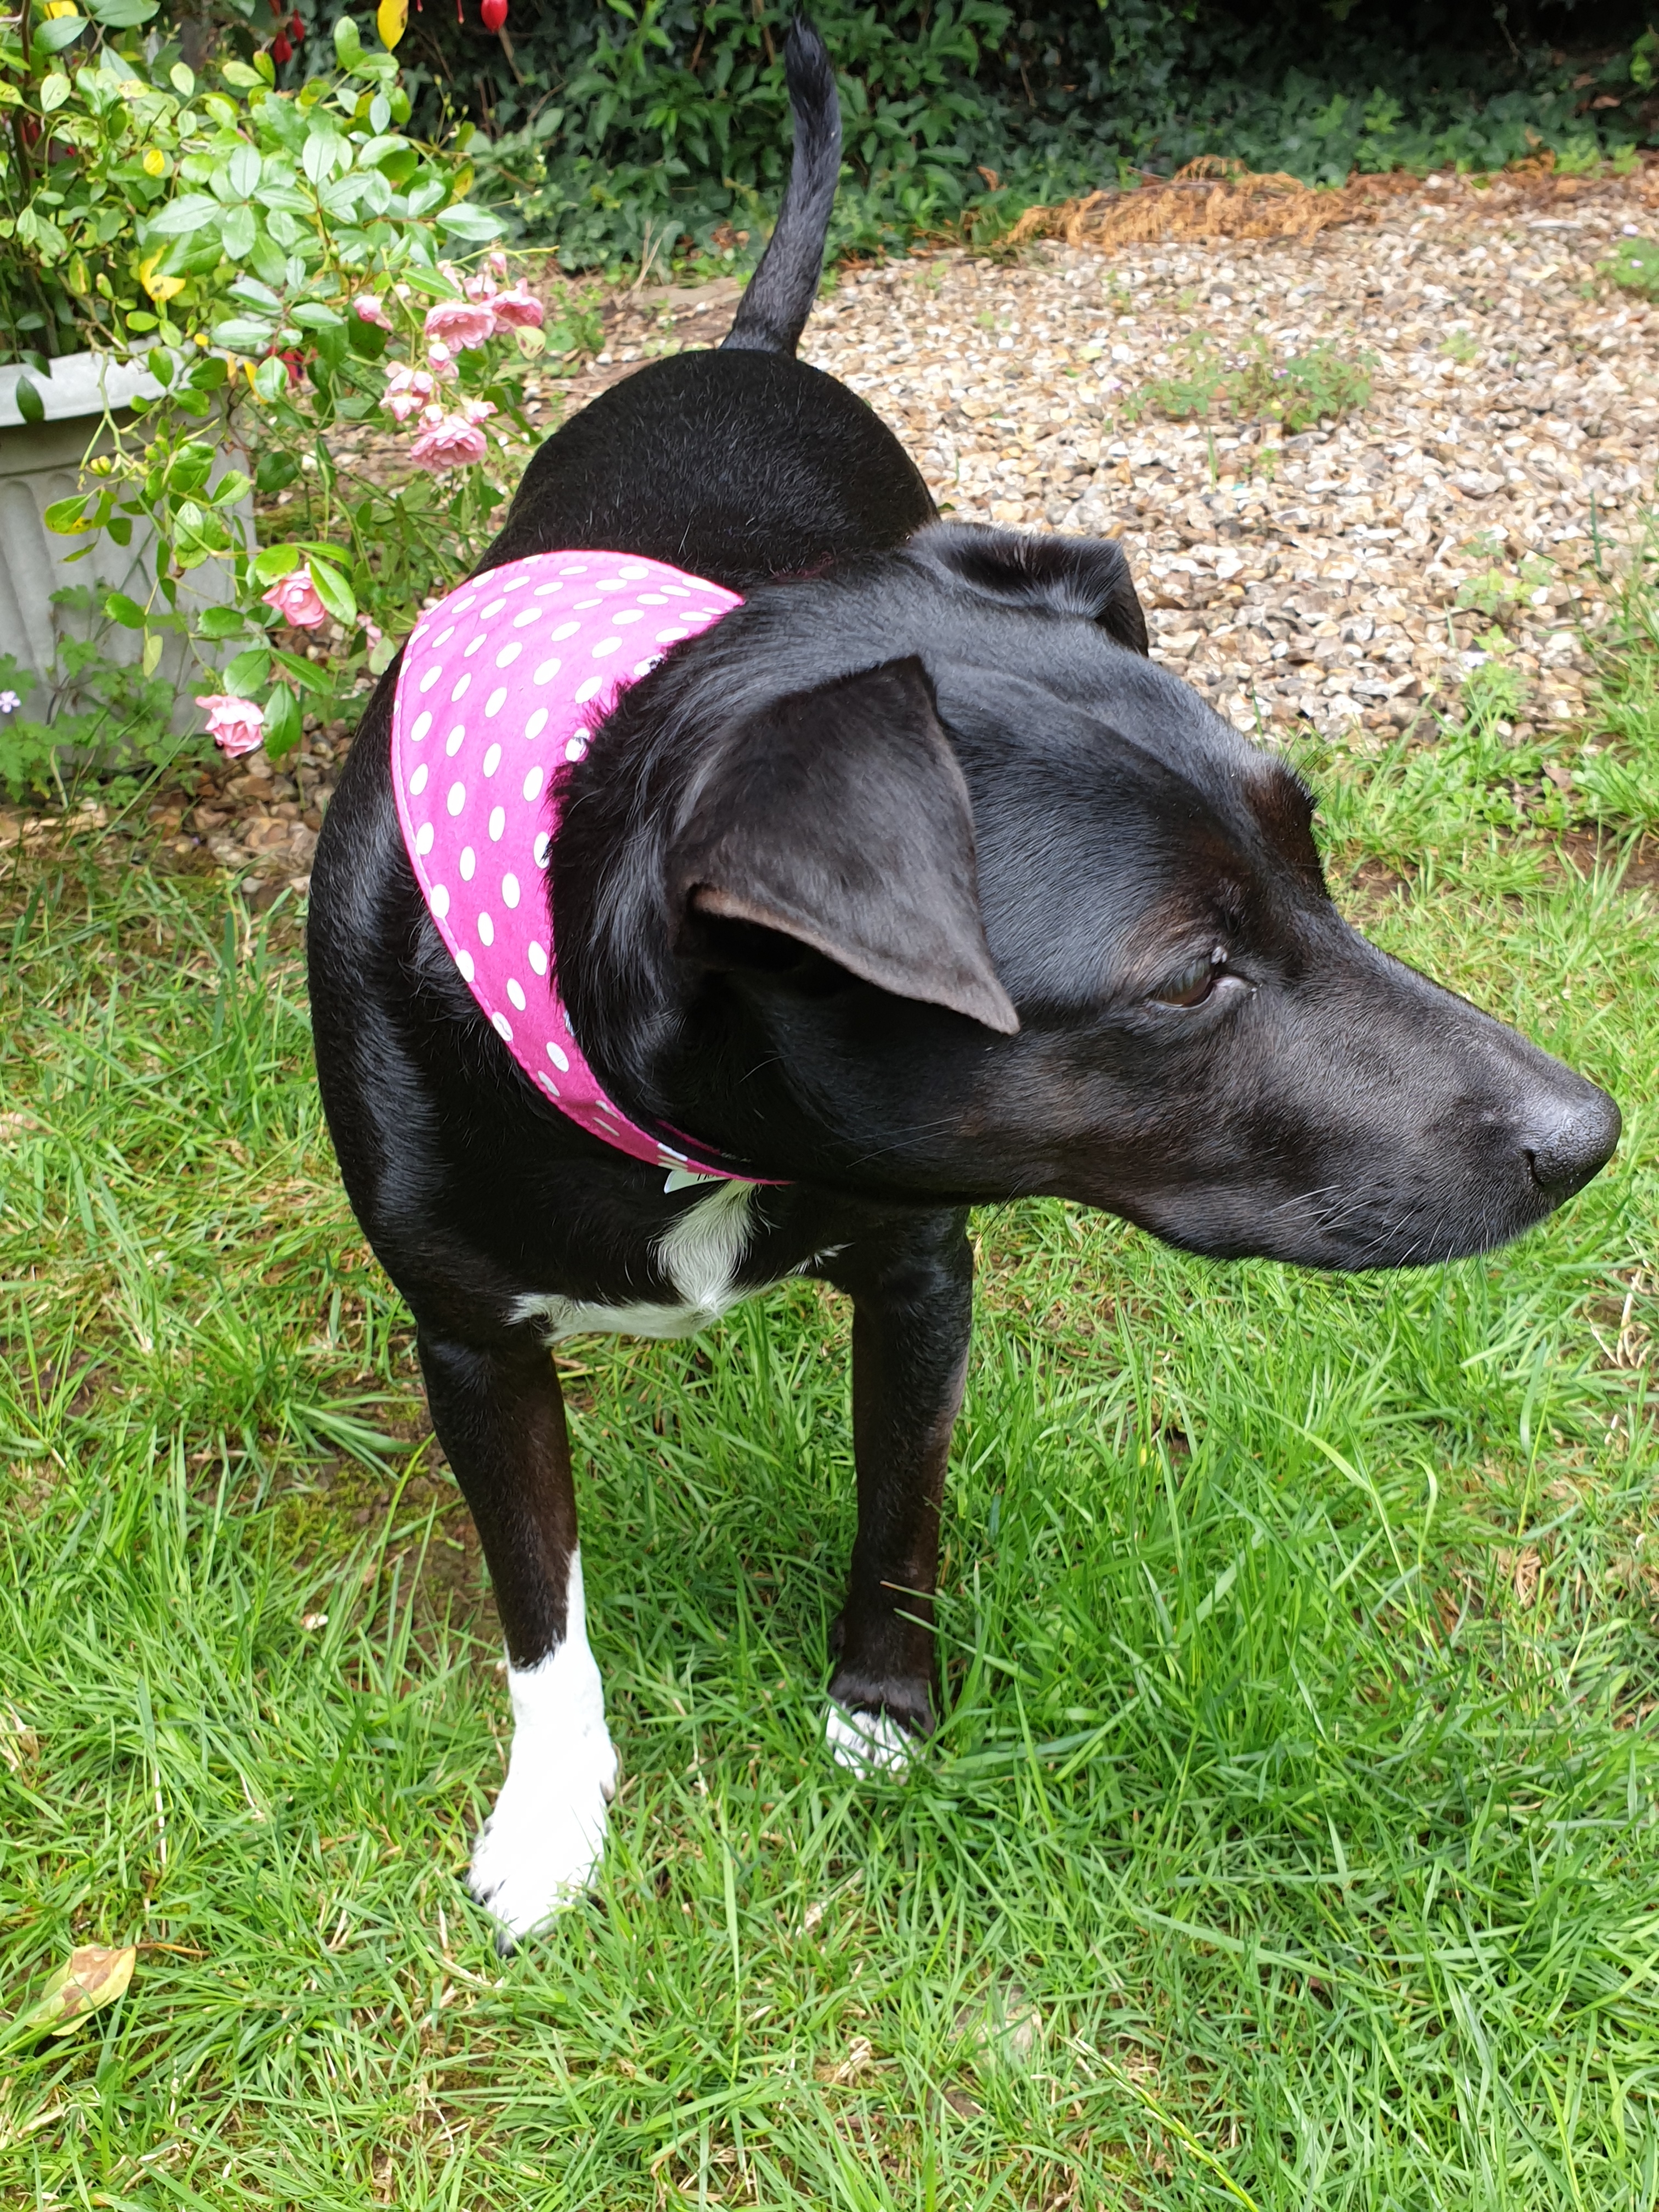 Gift guide option, Peach Perfect white & white spotted bandana on black dog. 